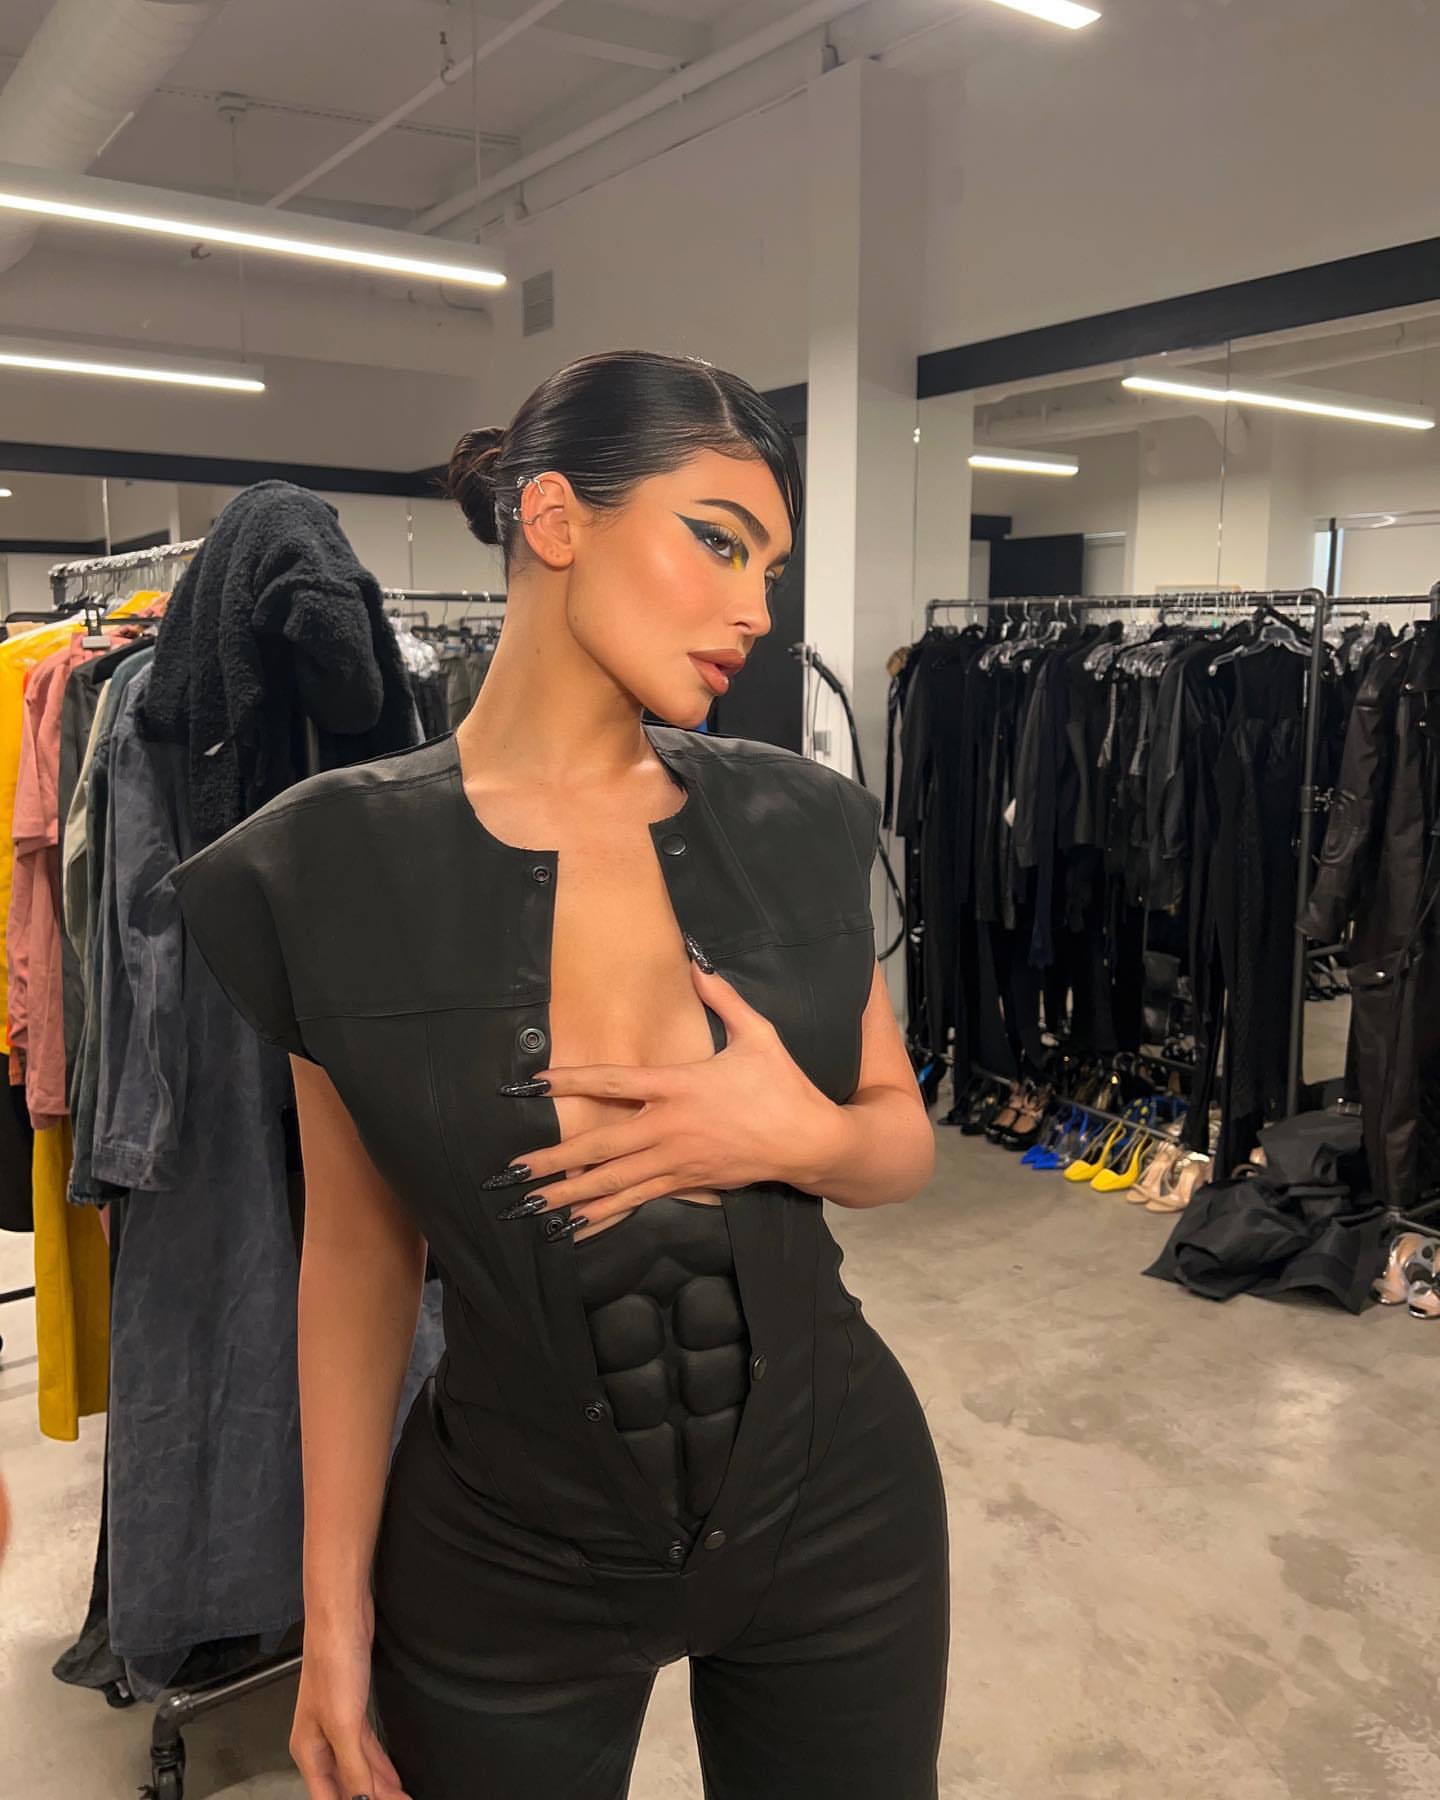 Kylie Jenner Shares Thirst Trap While Cheating Rumors Swirl! - Photo 10